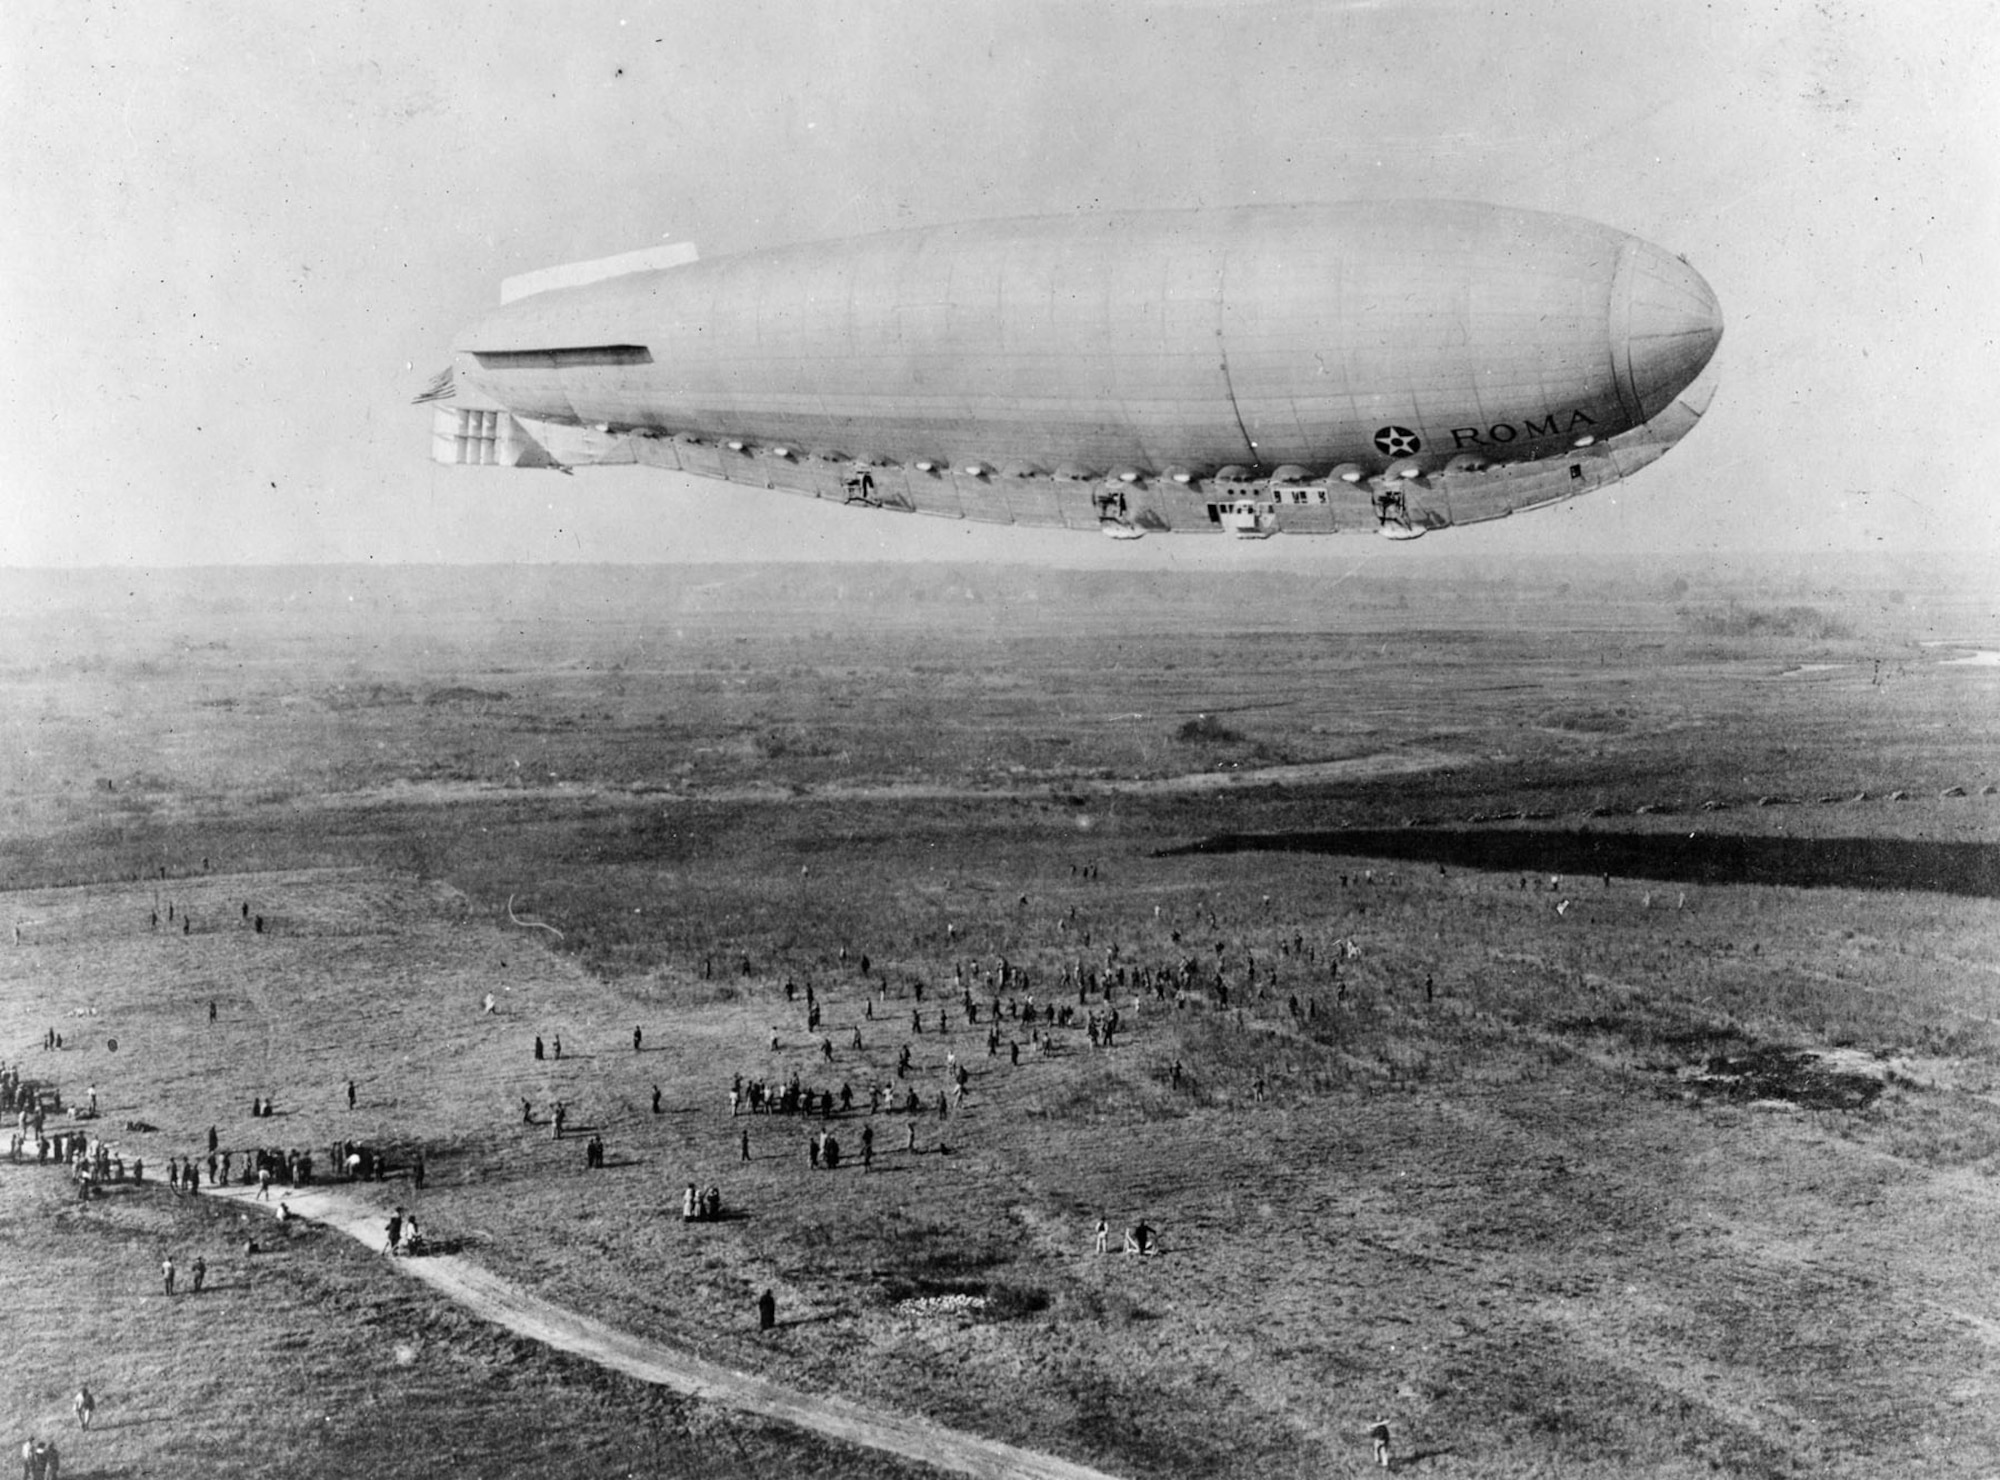 The Roma makes its first flight in the United States at Langley Field, Va., on Nov. 15, 1921. (U.S. Air Force photo)